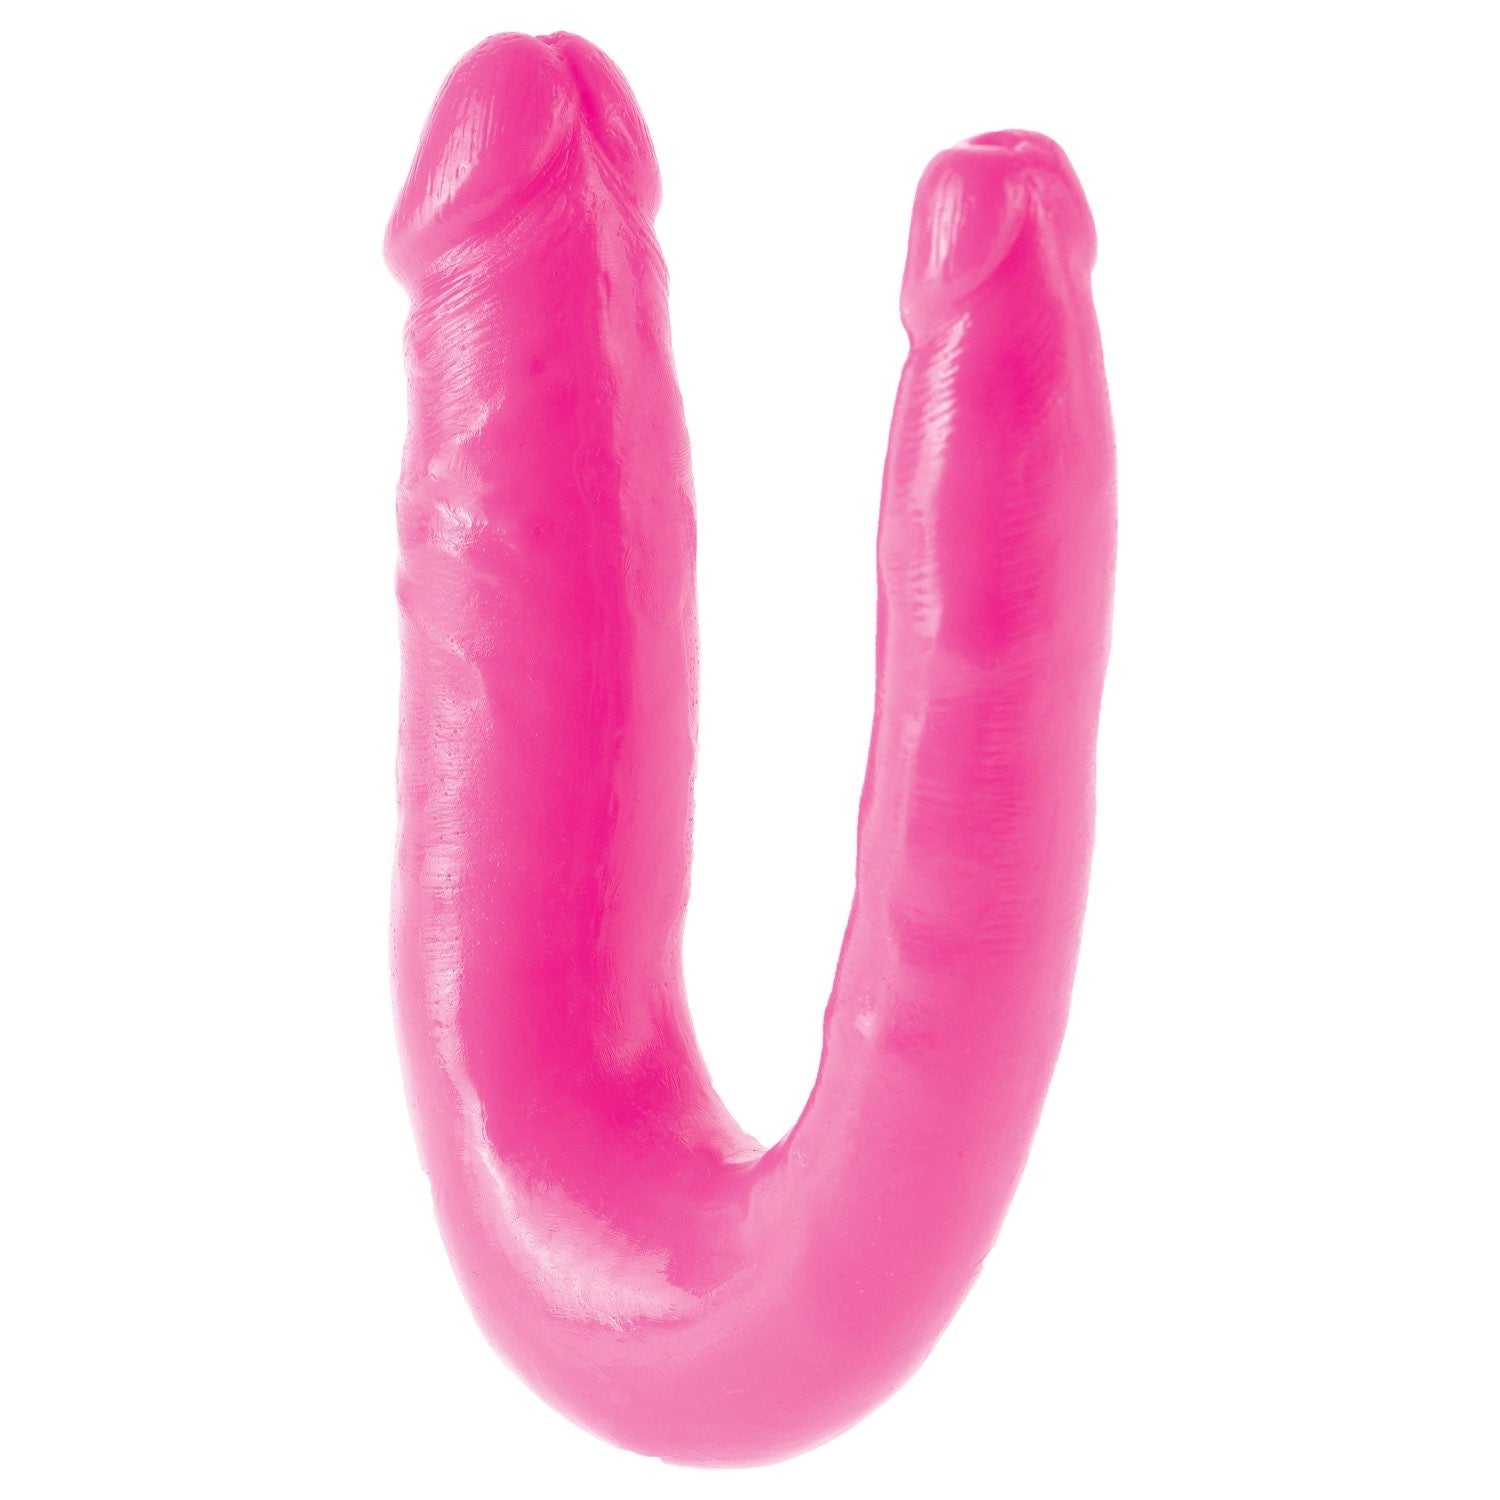 Dillio Double Trouble - Pink Double Penetrator Dong by Pipedream